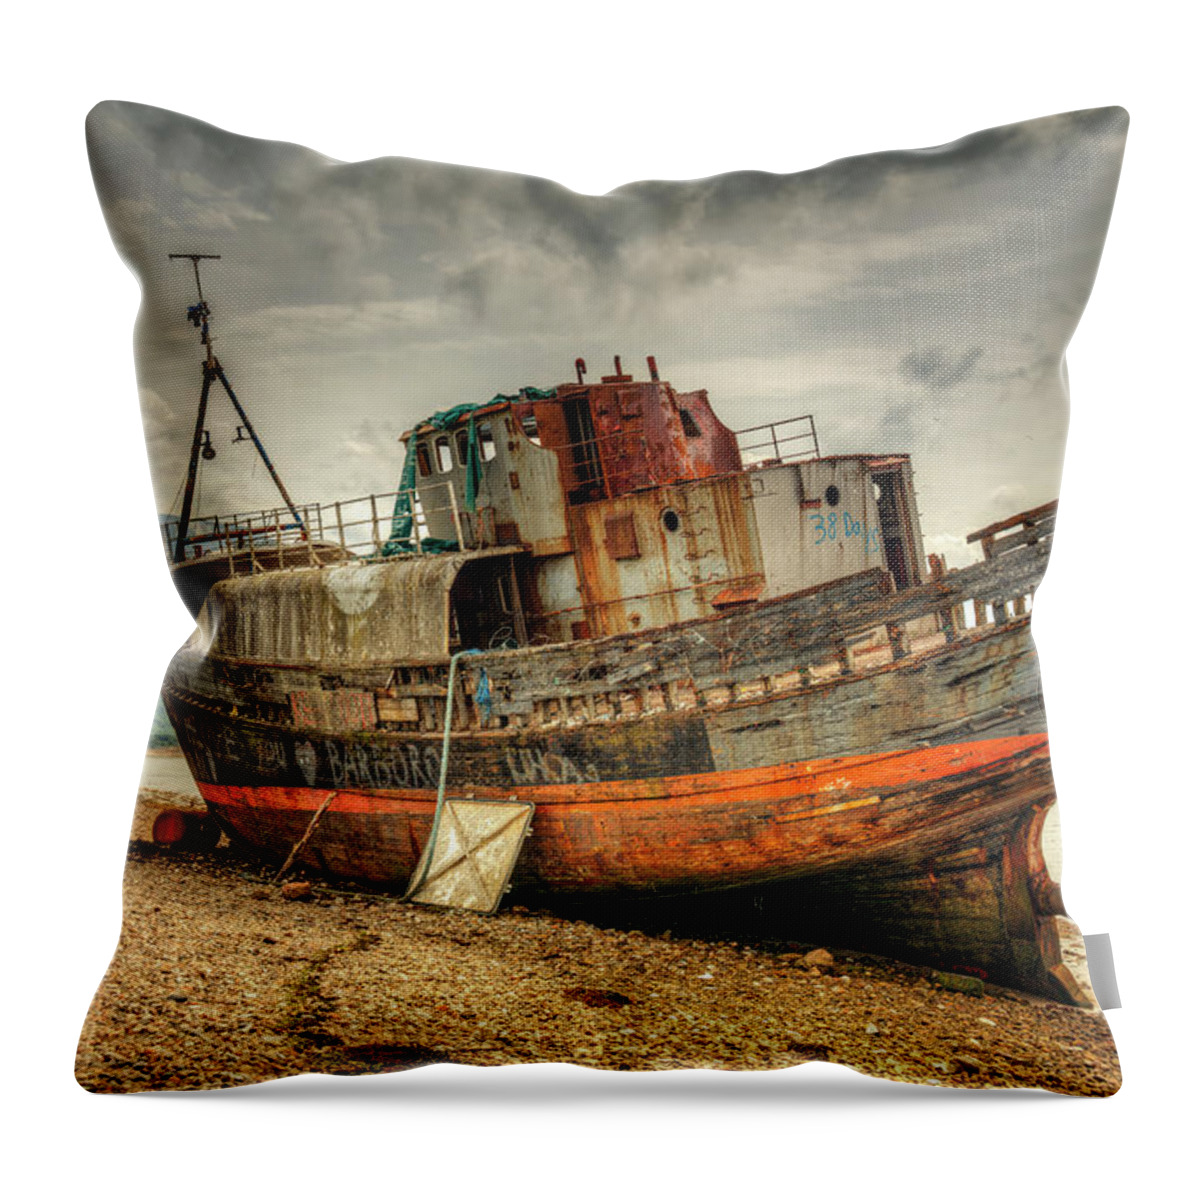 Corpach Wreck Throw Pillow featuring the photograph Corpach Ship Wreck by Ray Devlin